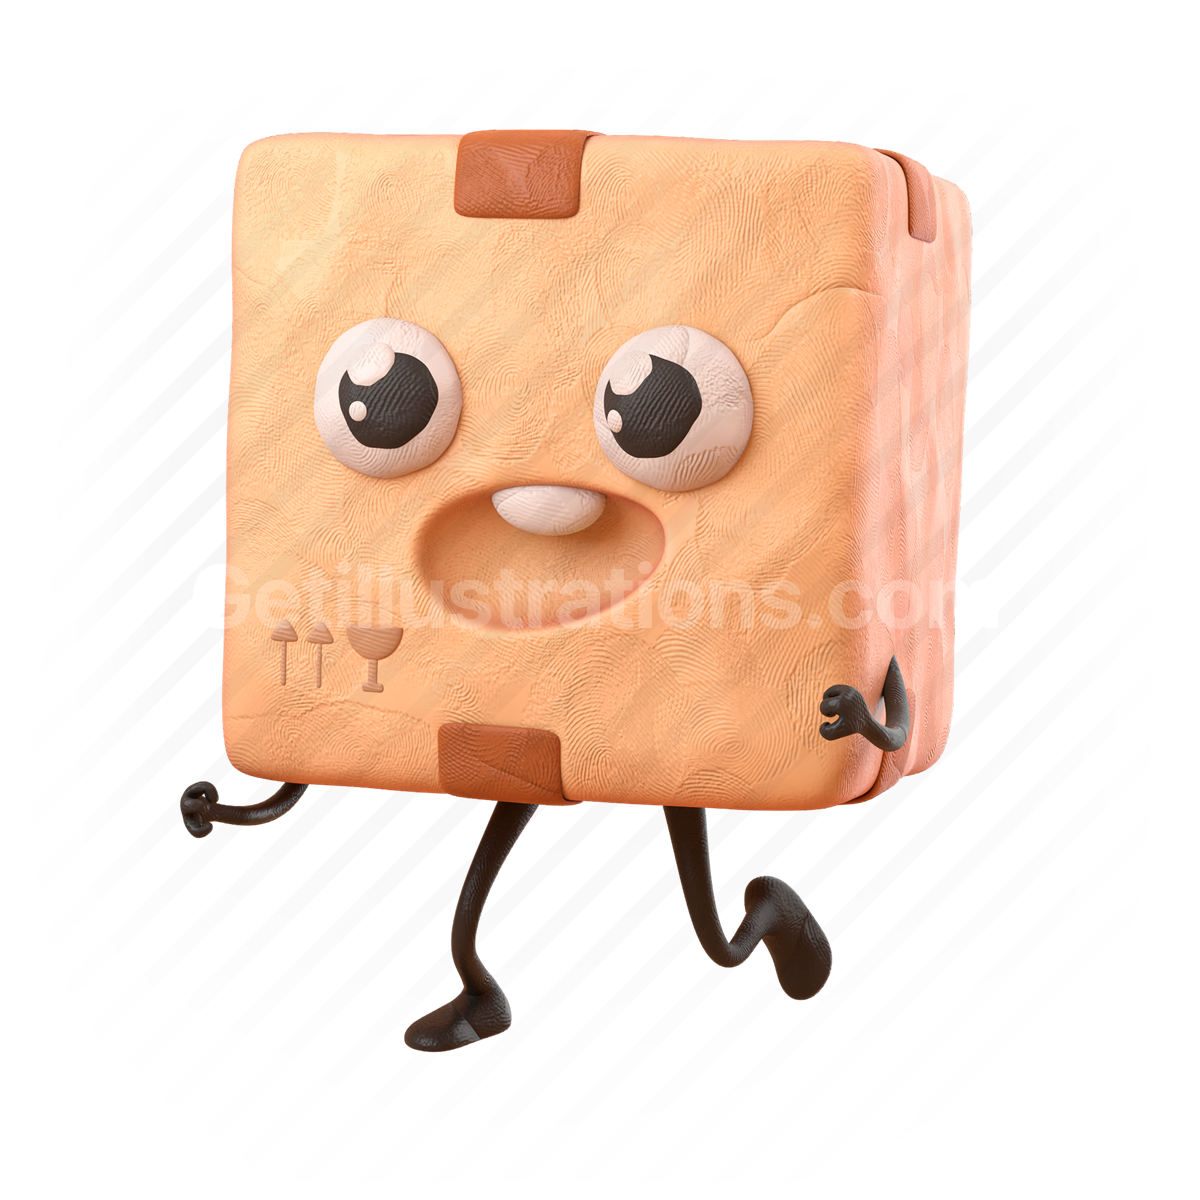 box, package, delivery, logistics, happy, innocent, emoticon, emoji, character